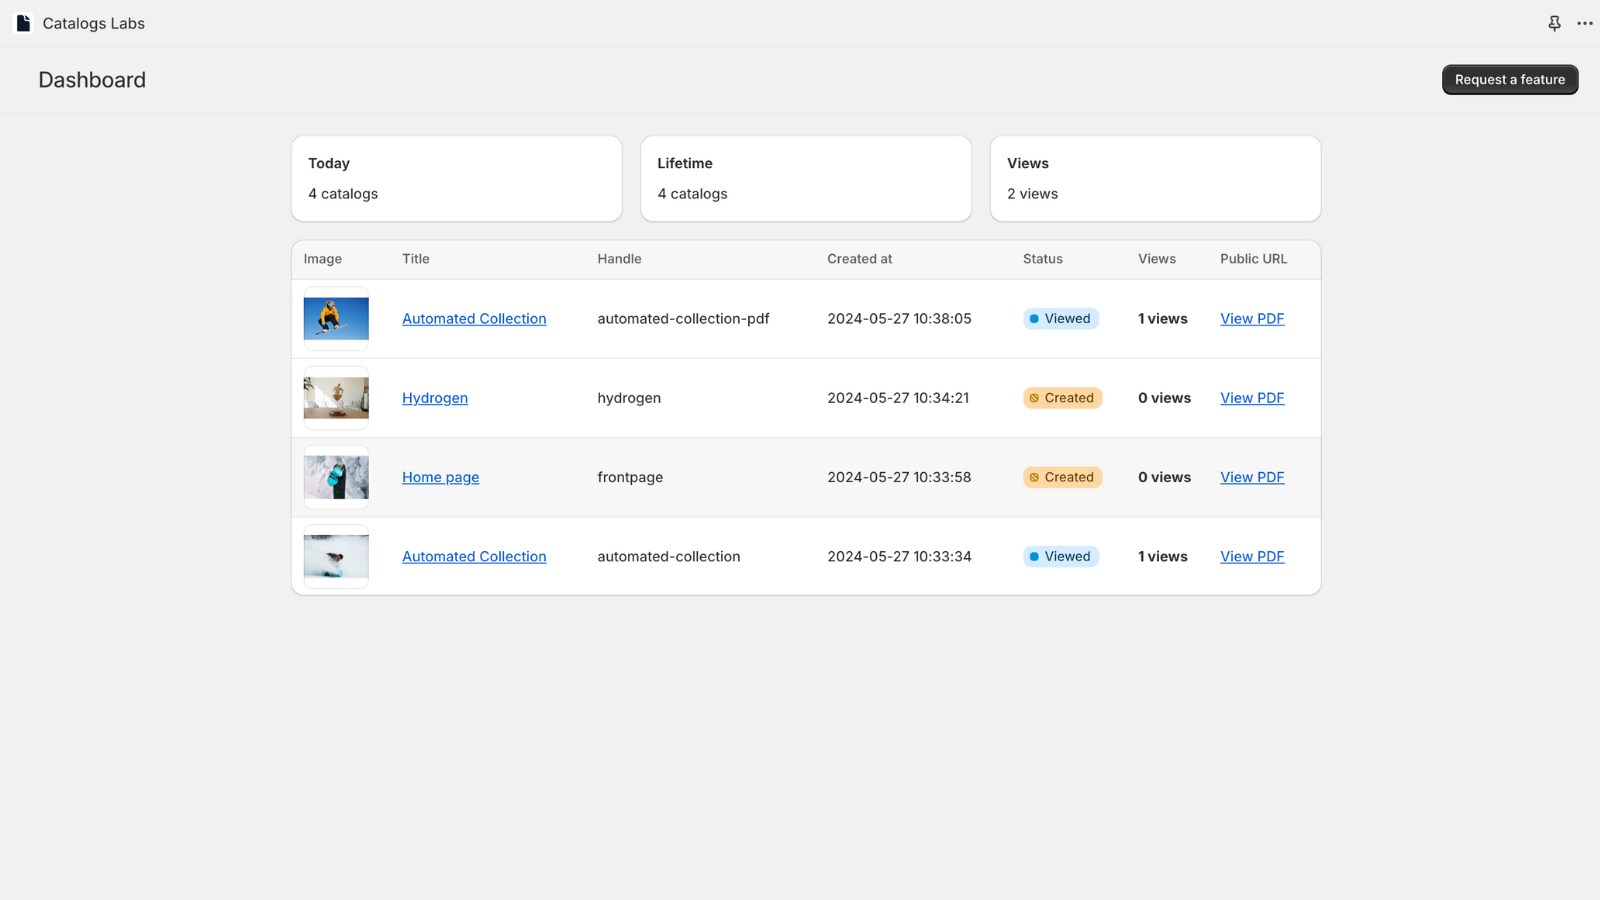 Catalogs Labs - Dashboard-side